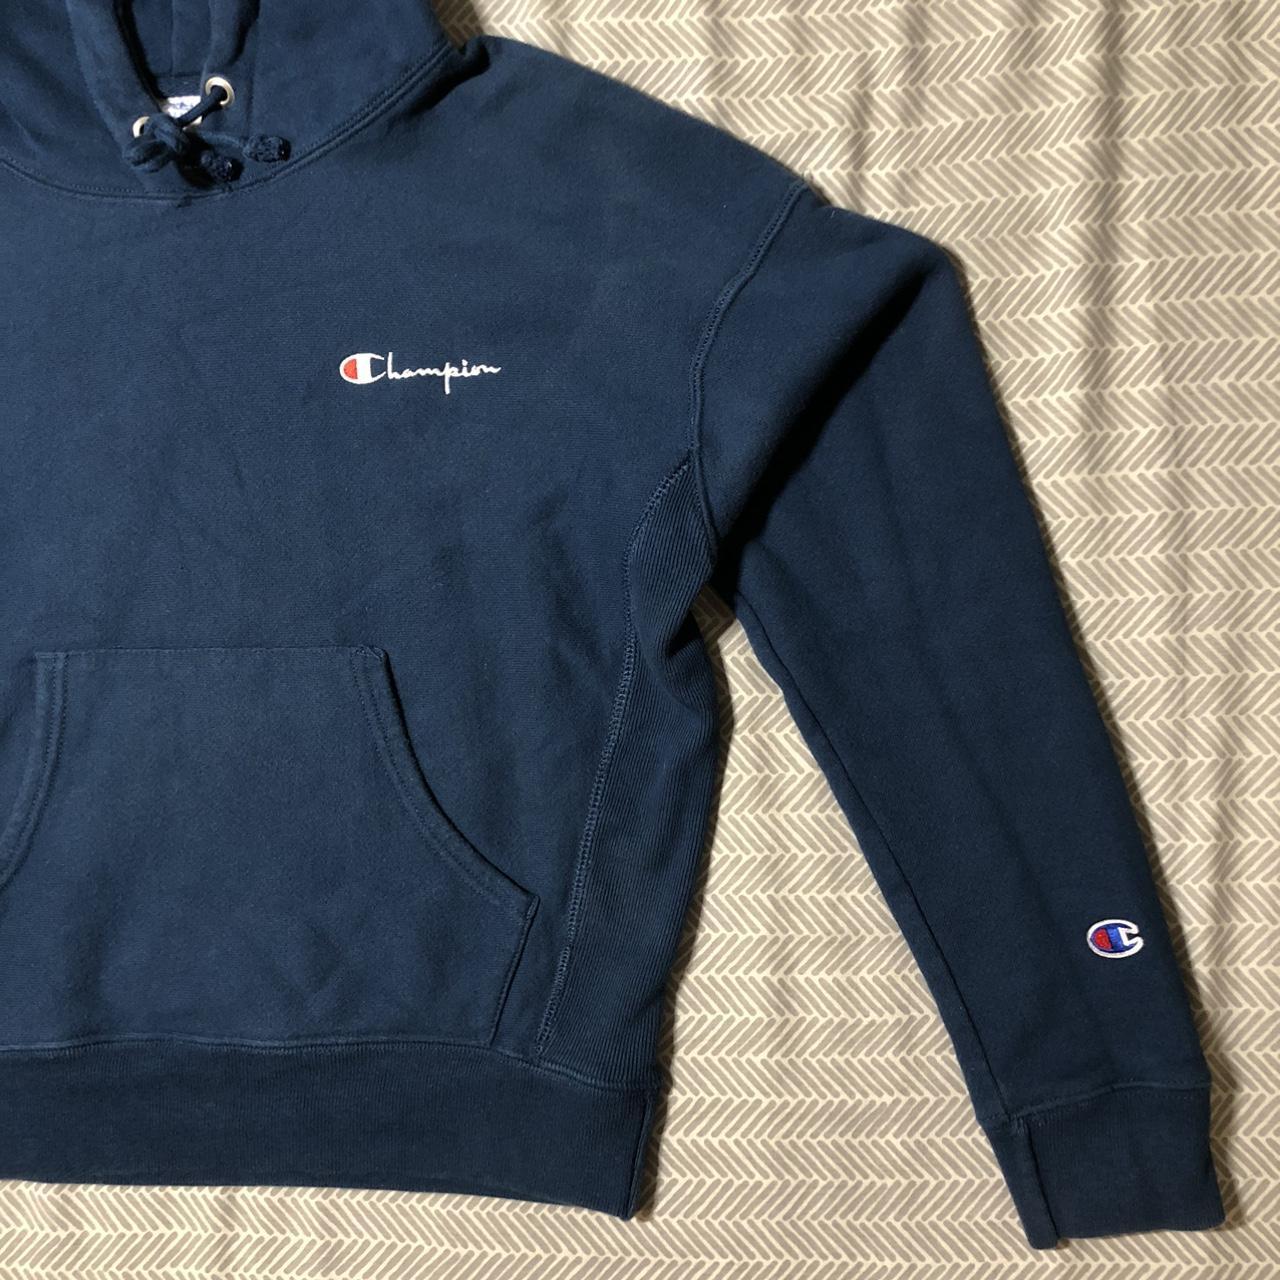 Champion Women's Navy and Blue Hoodie - 2